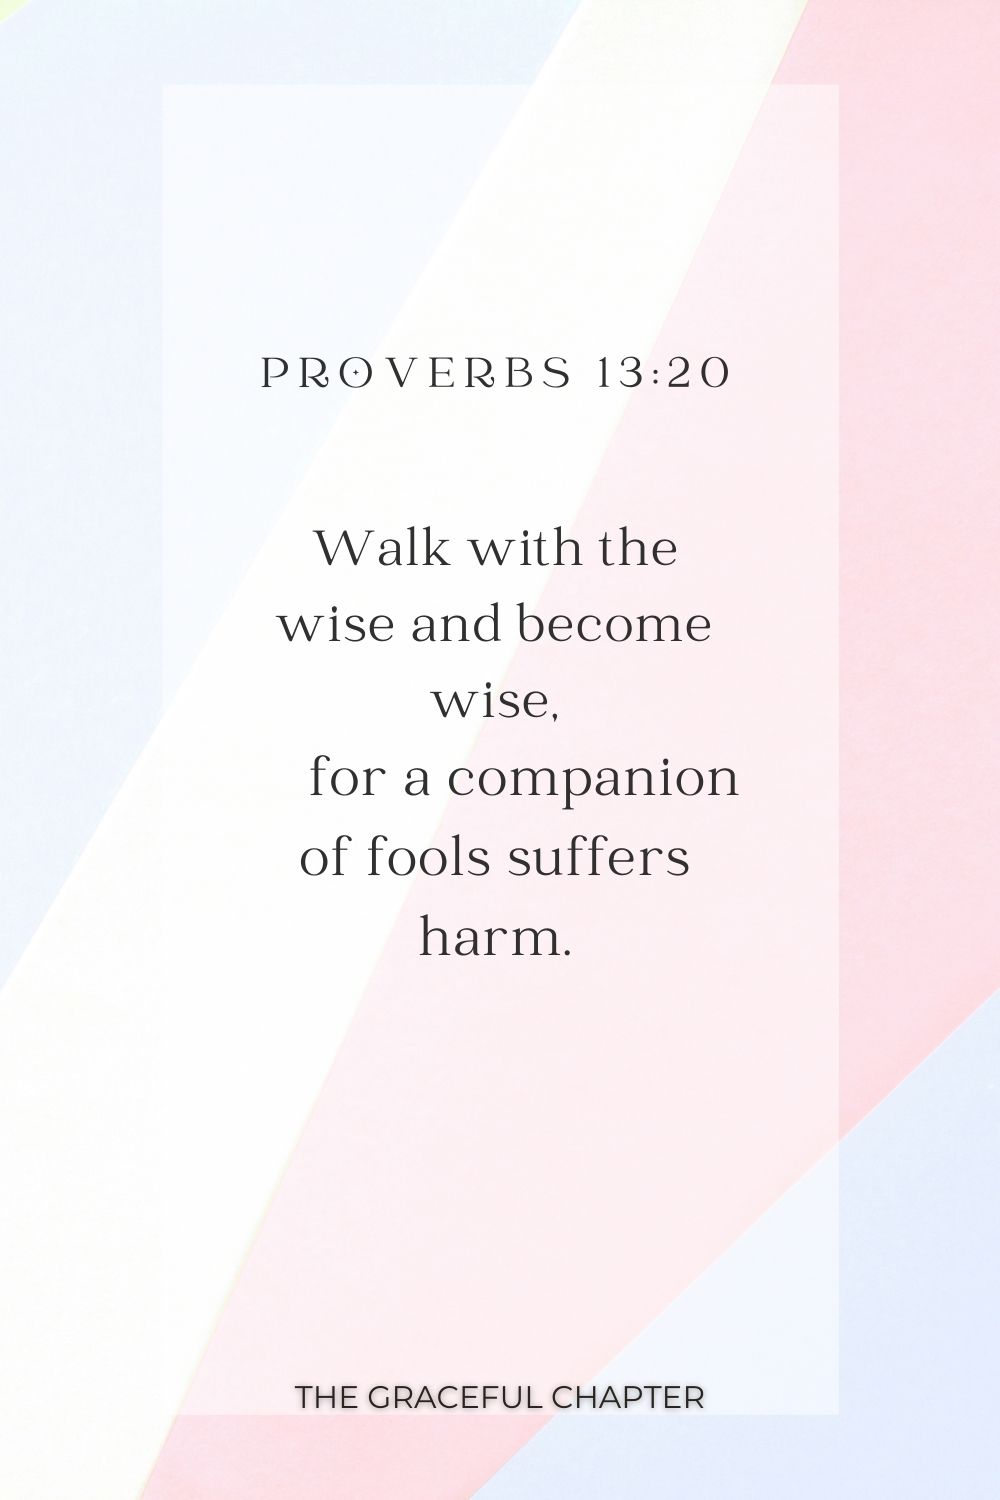 Walk with the wise and become wise,     for a companion of fools suffers harm. Proverbs 13:20